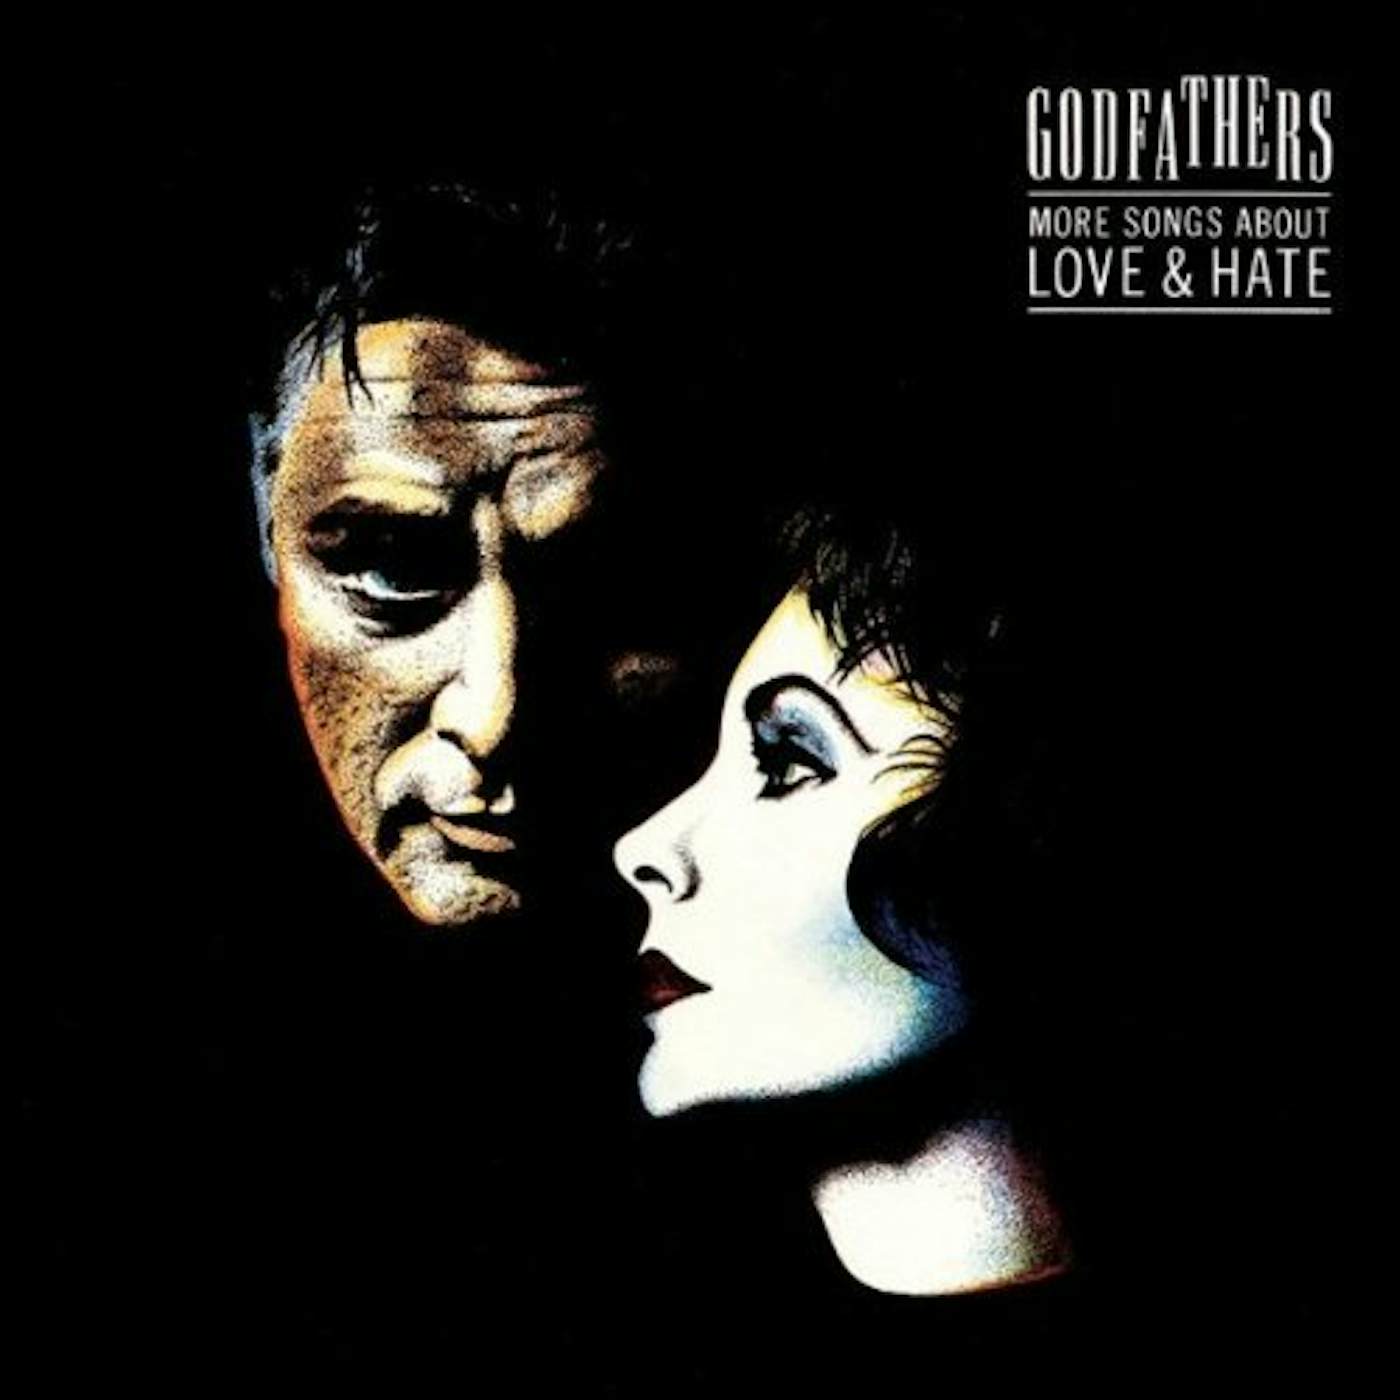 The Godfathers HATE Vinyl Record